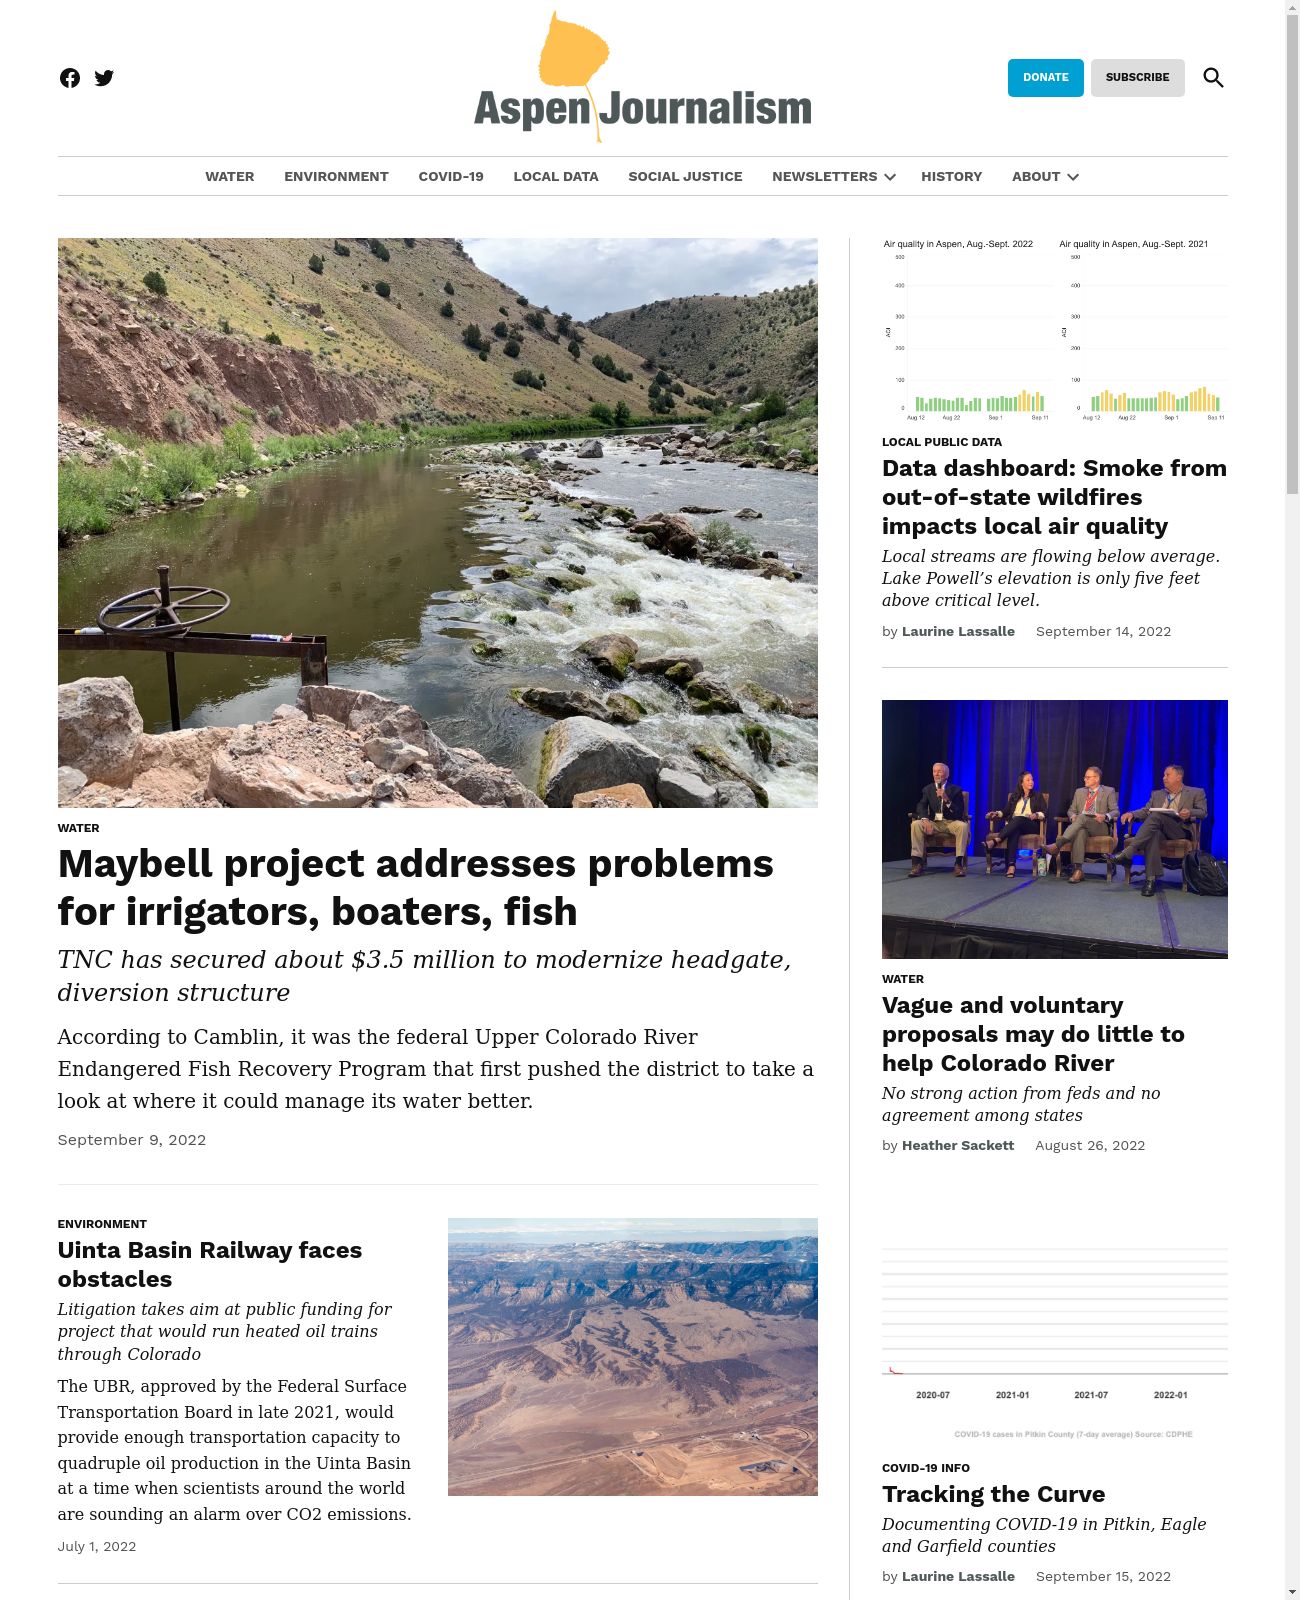 Aspen Journalism at 2022-09-18 16:49:28-06:00 local time